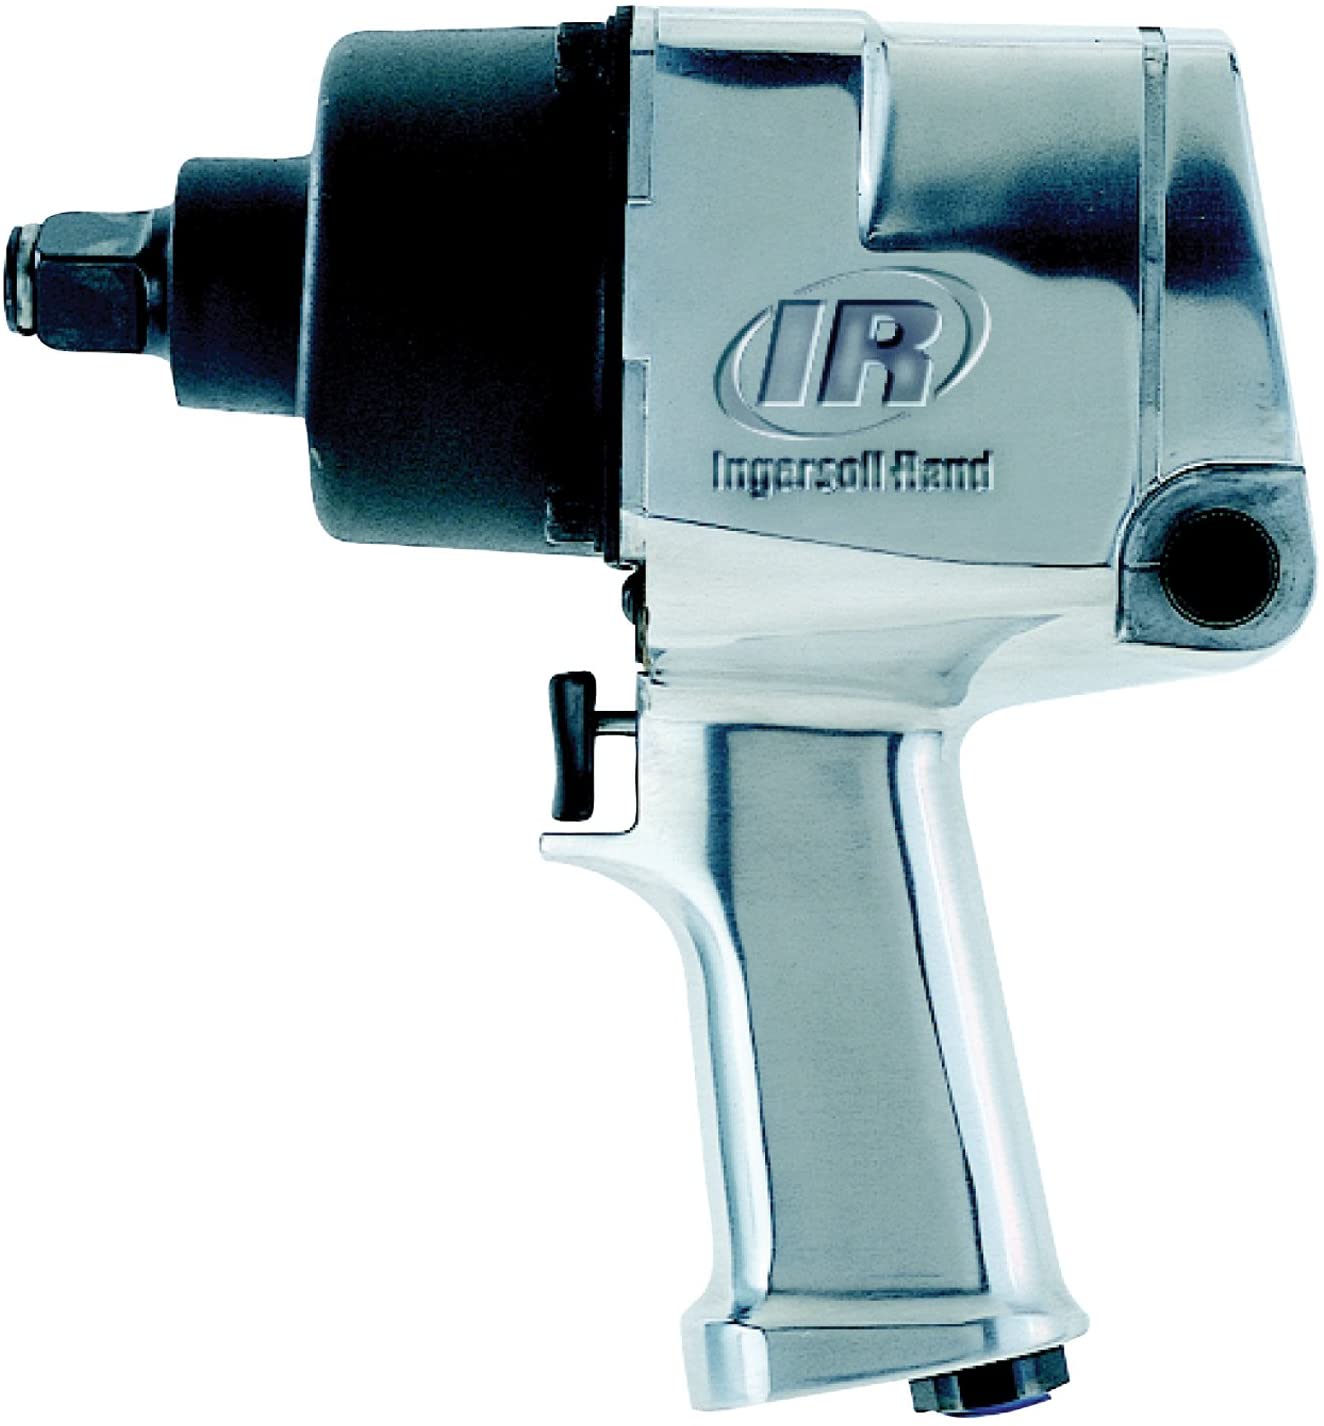 Ingersoll Rand 3/4 Inch Drive Super Duty Air Impact Wrench IRT261 1,100 ft-lbsF